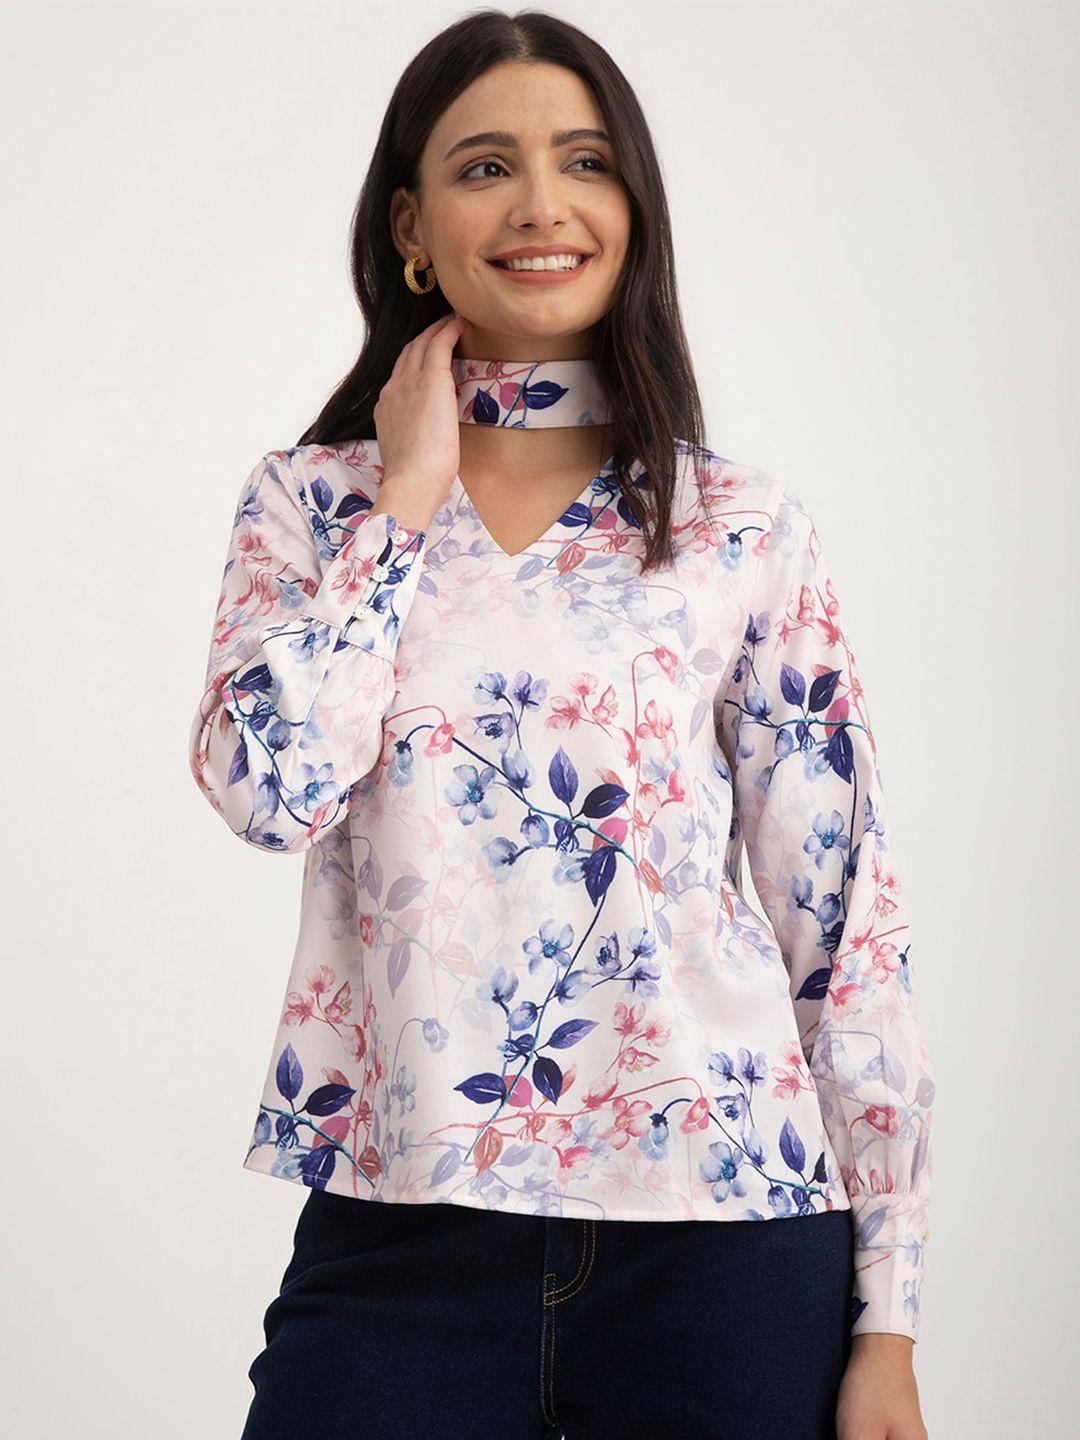 fablestreet floral printed choker neck cuffed sleeves top